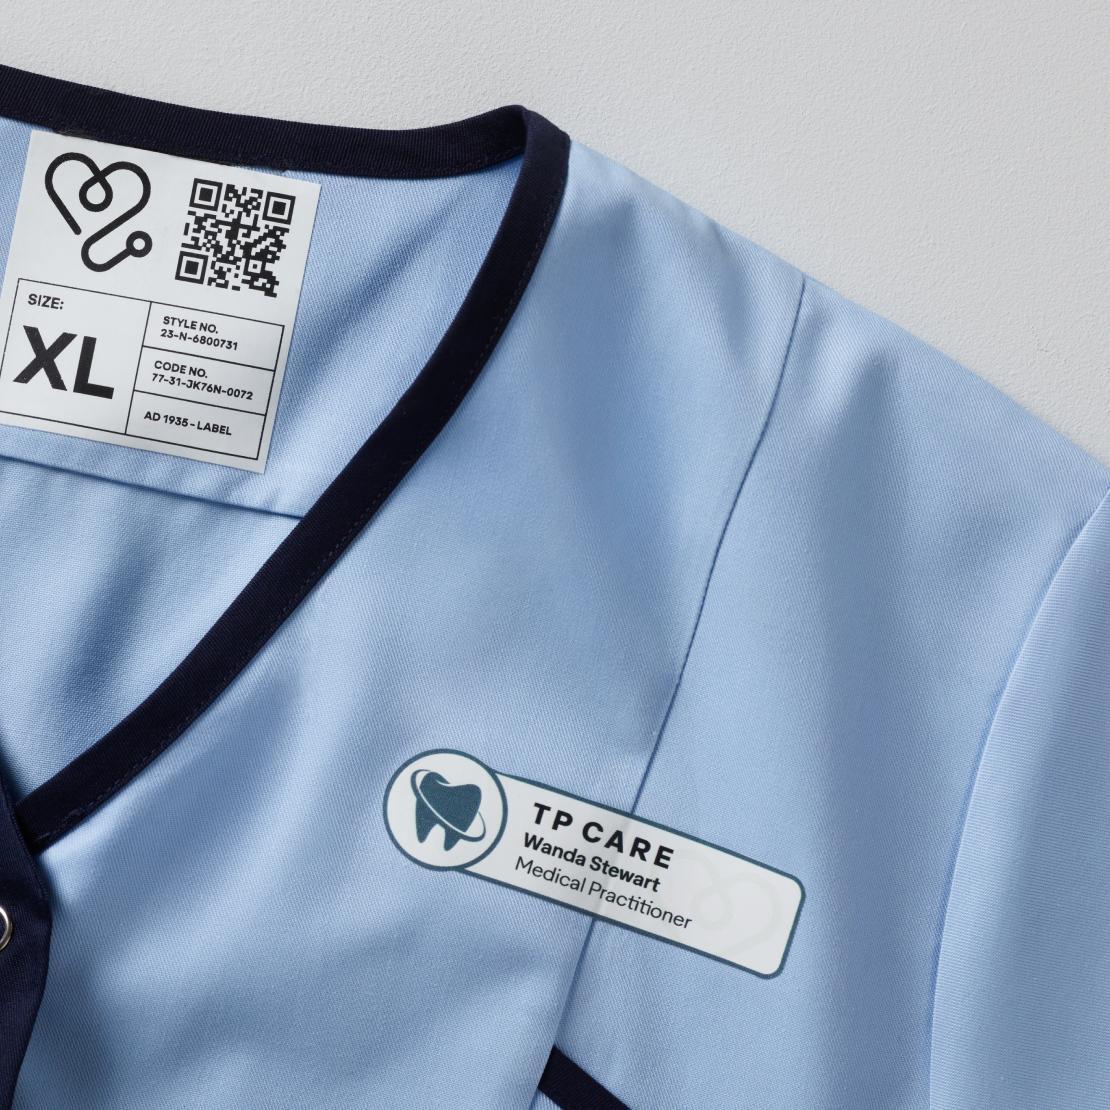 embelex customized label printing for workwear